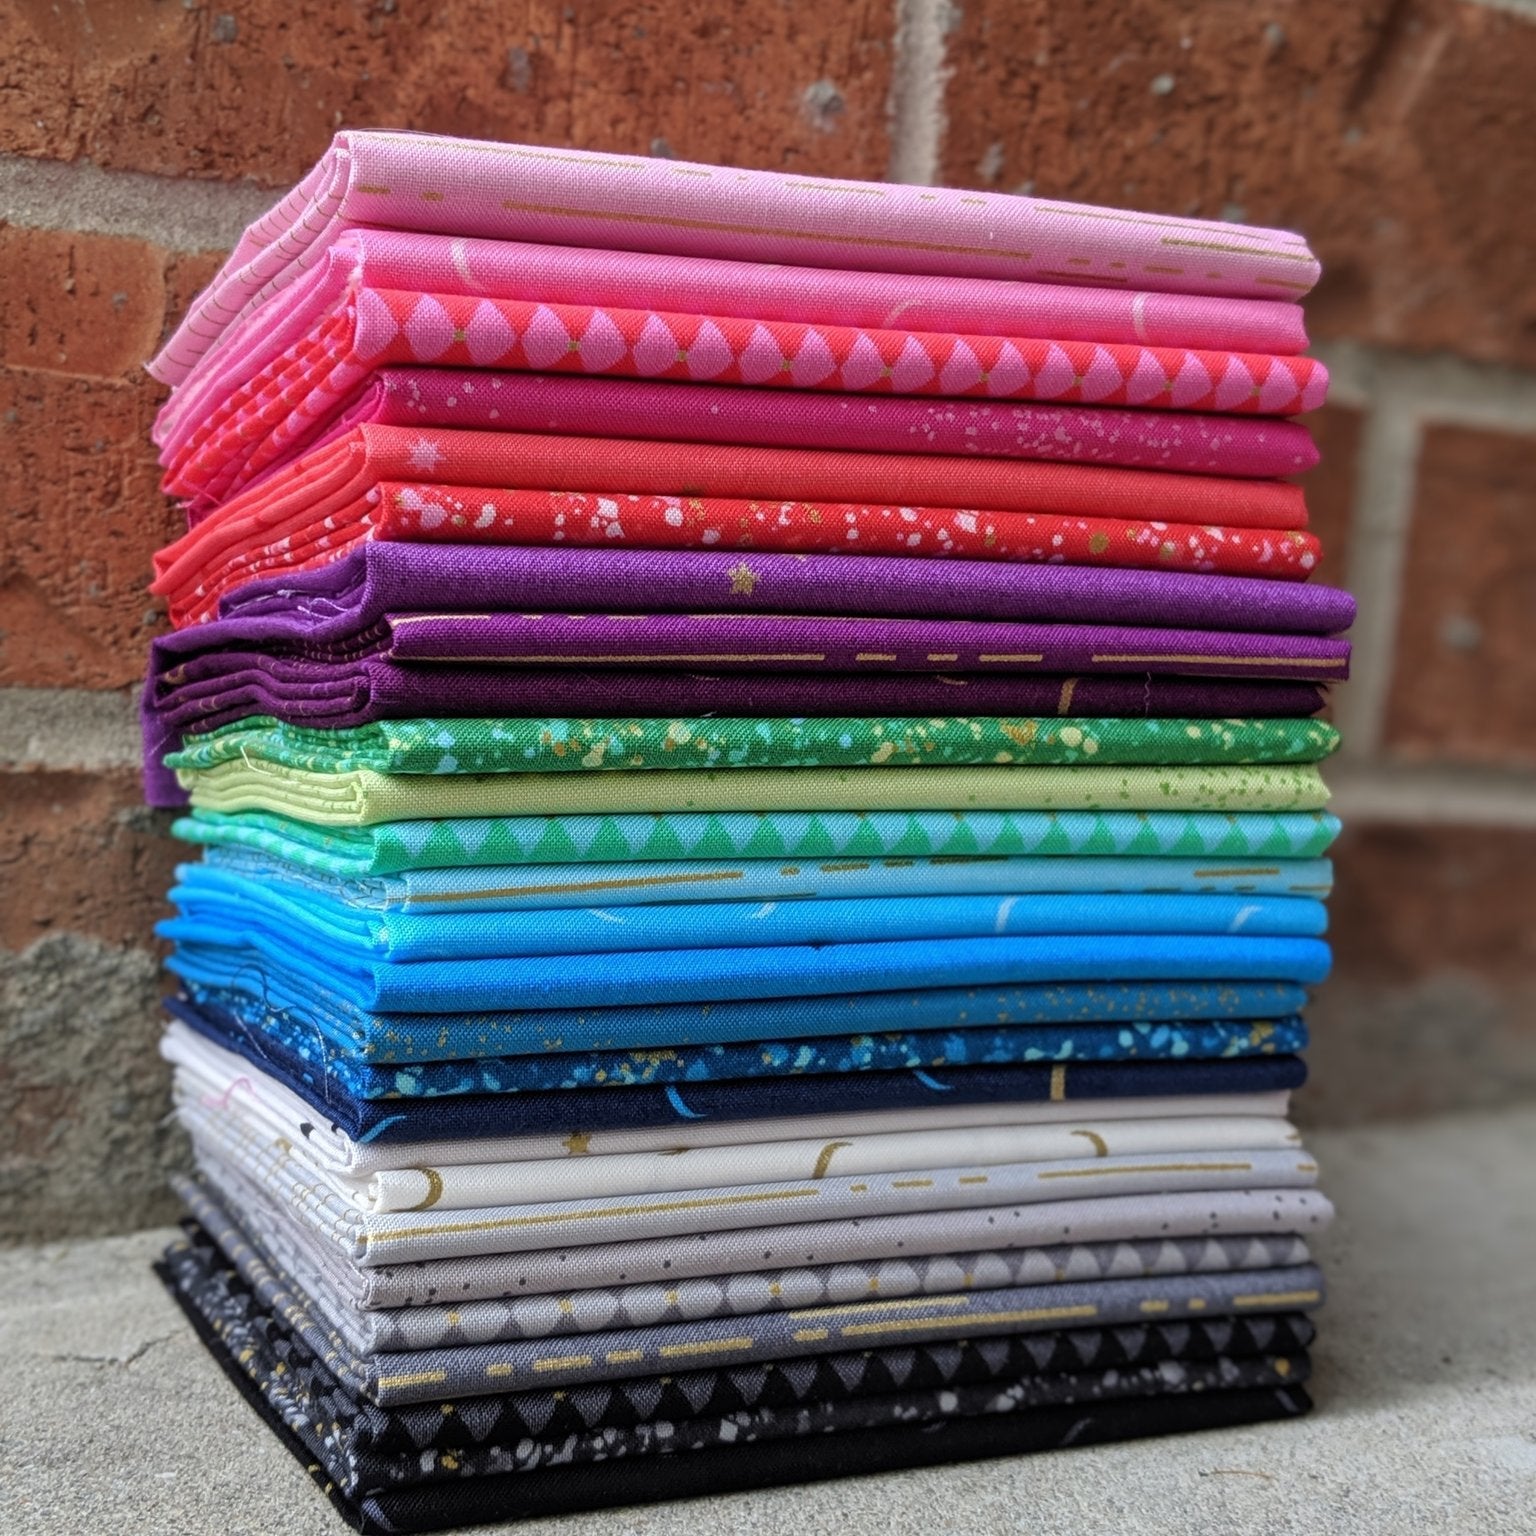 The image shows twenty-seven cuts of fabric folded on top of each other. Each fabric piece has its own color. Colors in this collection include black, gray, blue, purple, green, red, pink, and the other twenty colors are variants of those seven colors.